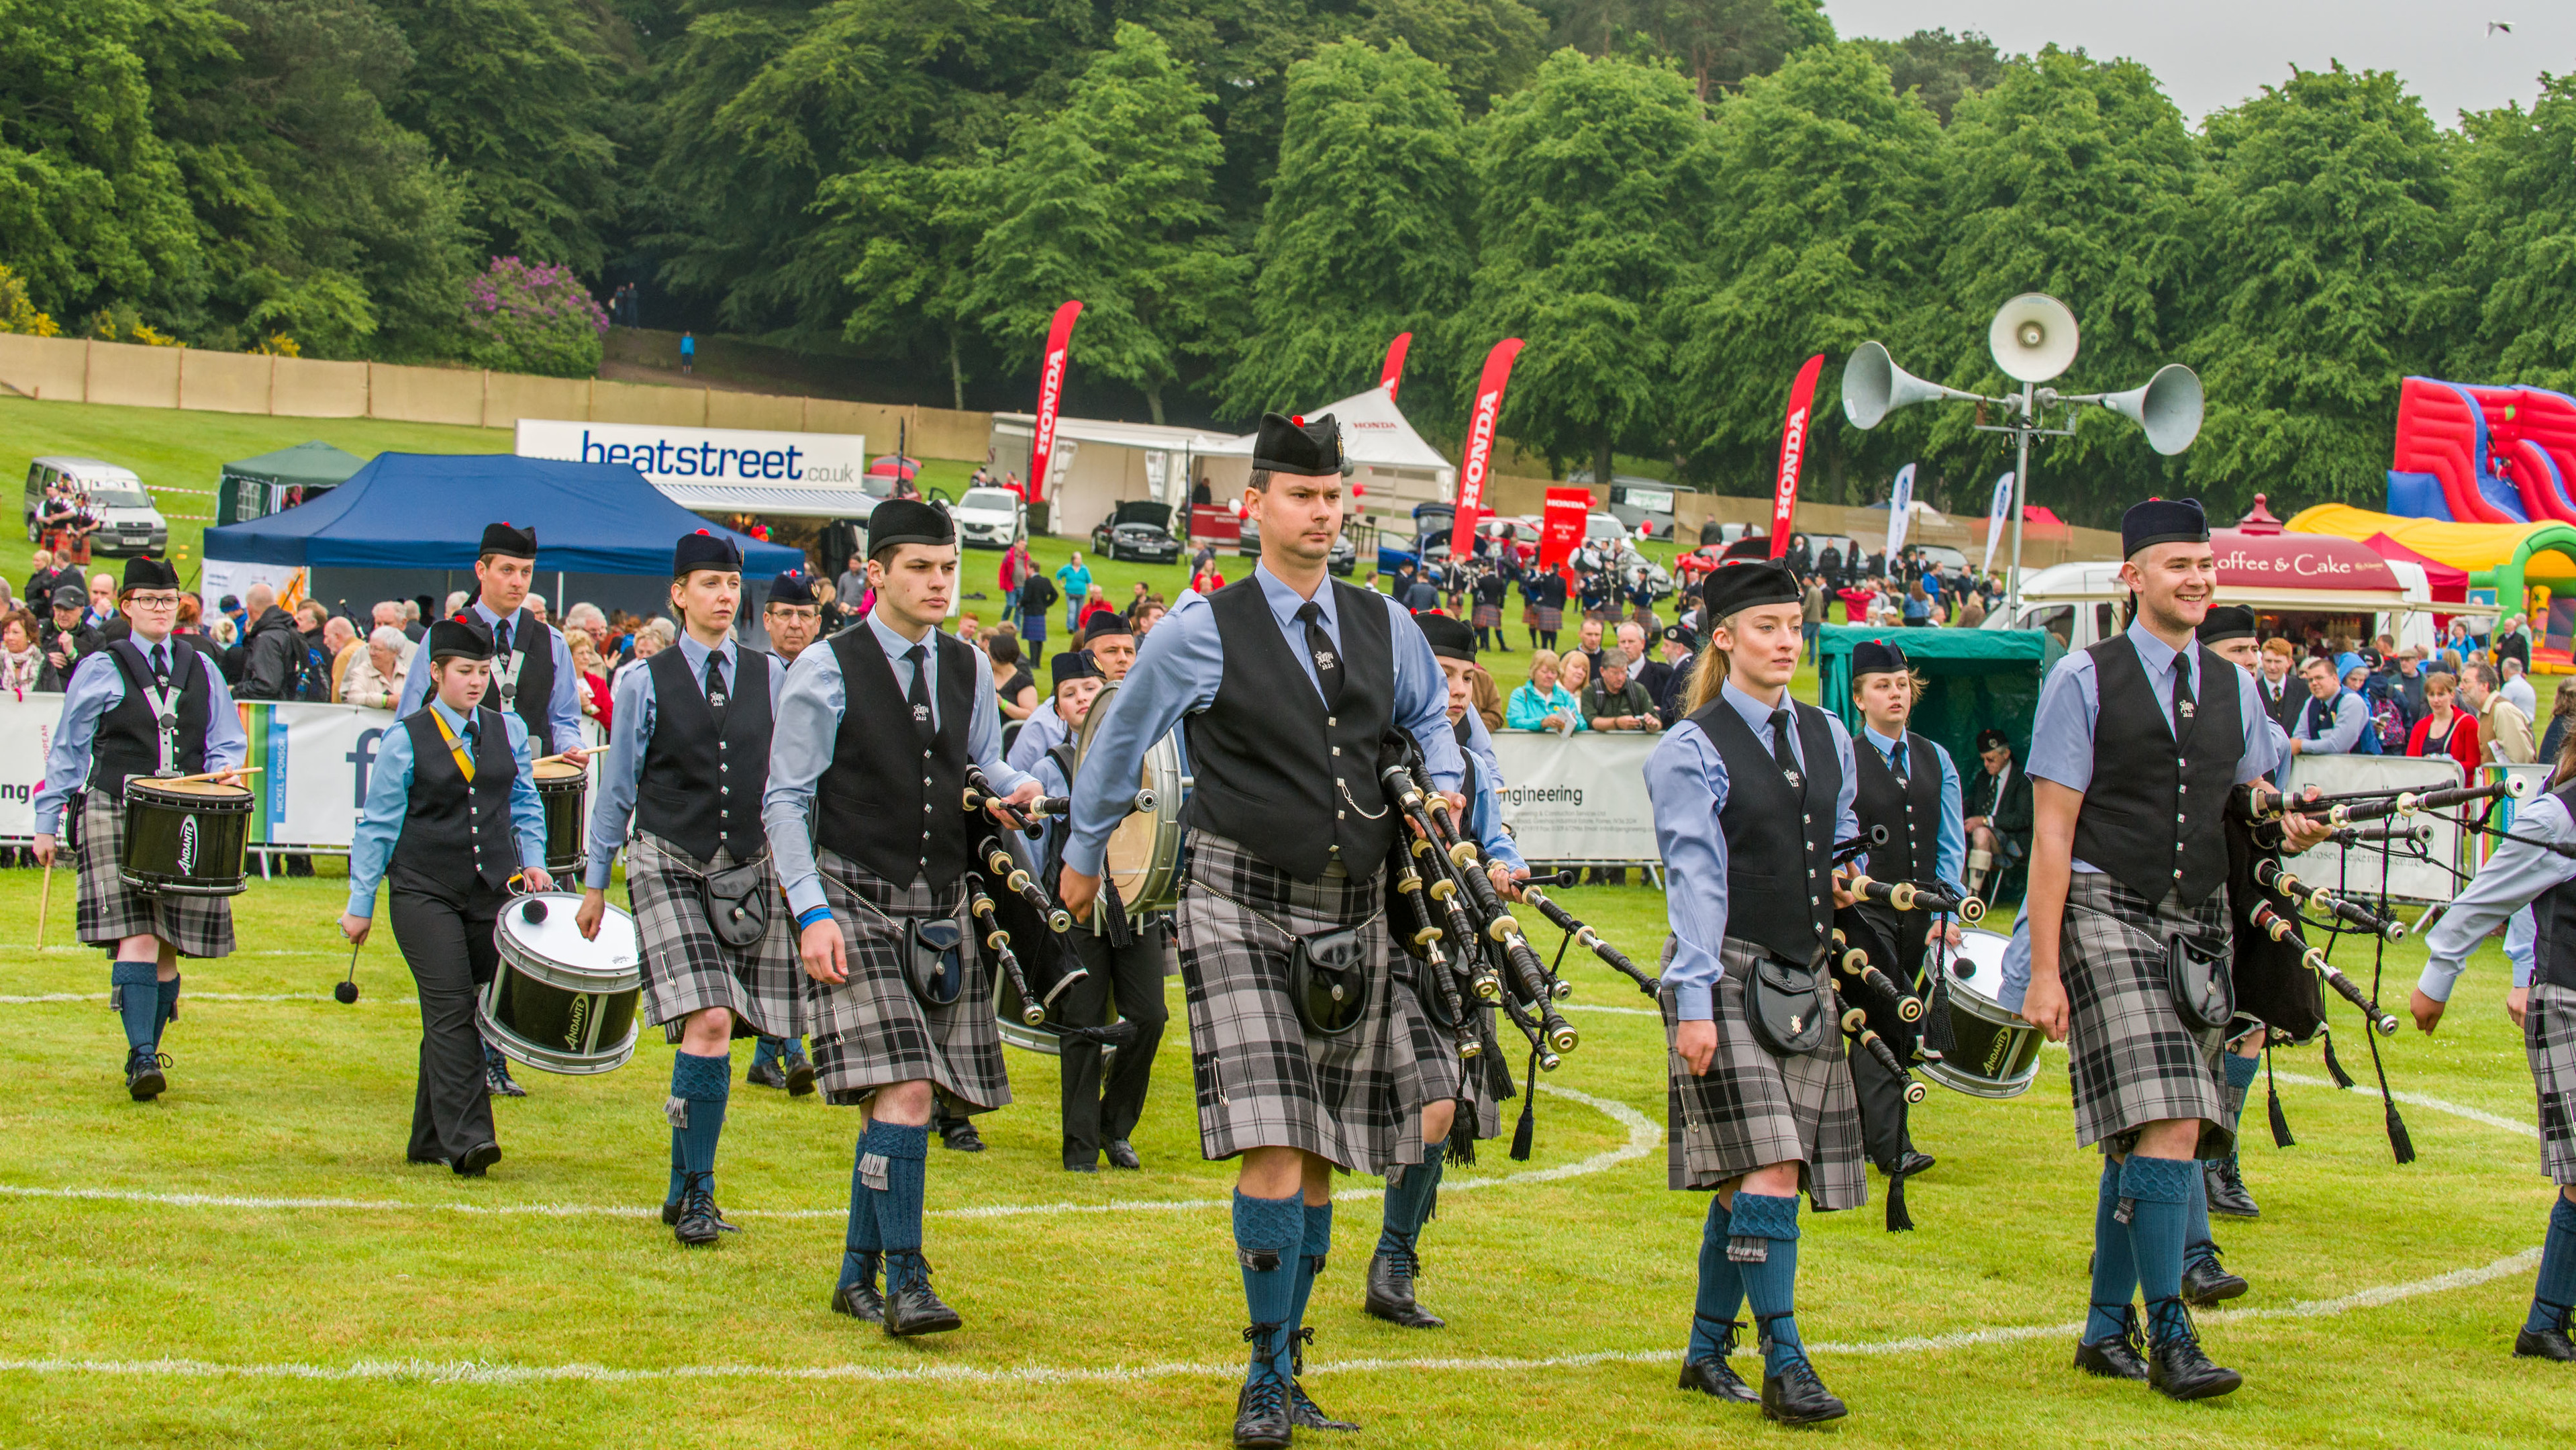 More than 100 pipe bands are expected to compete at this year's event.